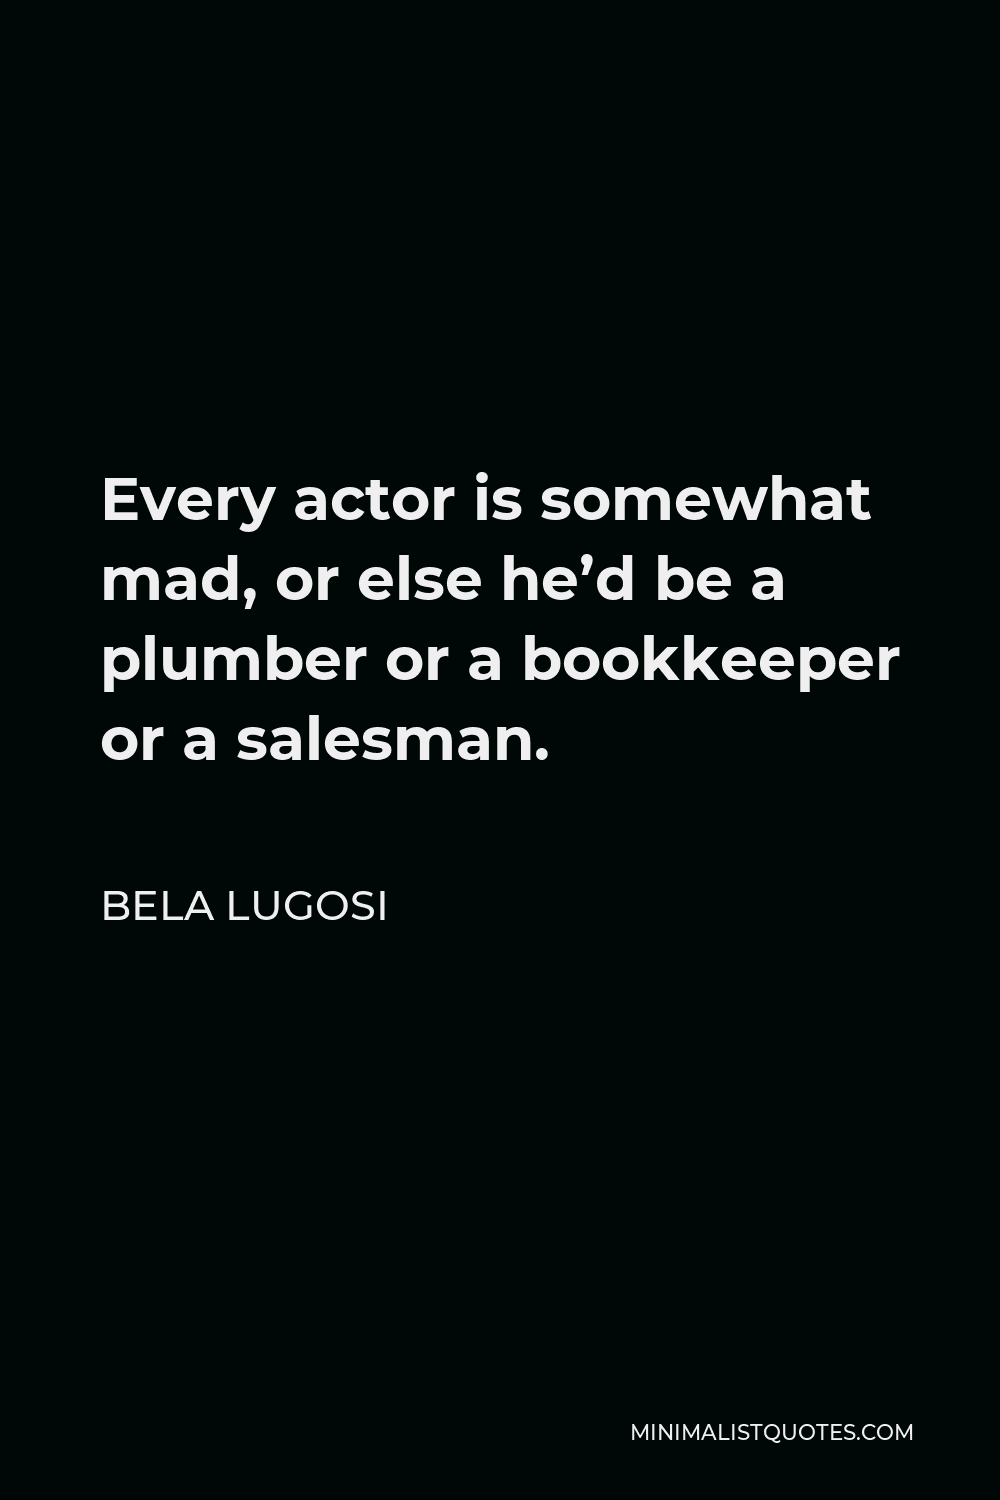 Bela Lugosi Quote - Every actor is somewhat mad, or else he’d be a plumber or a bookkeeper or a salesman.